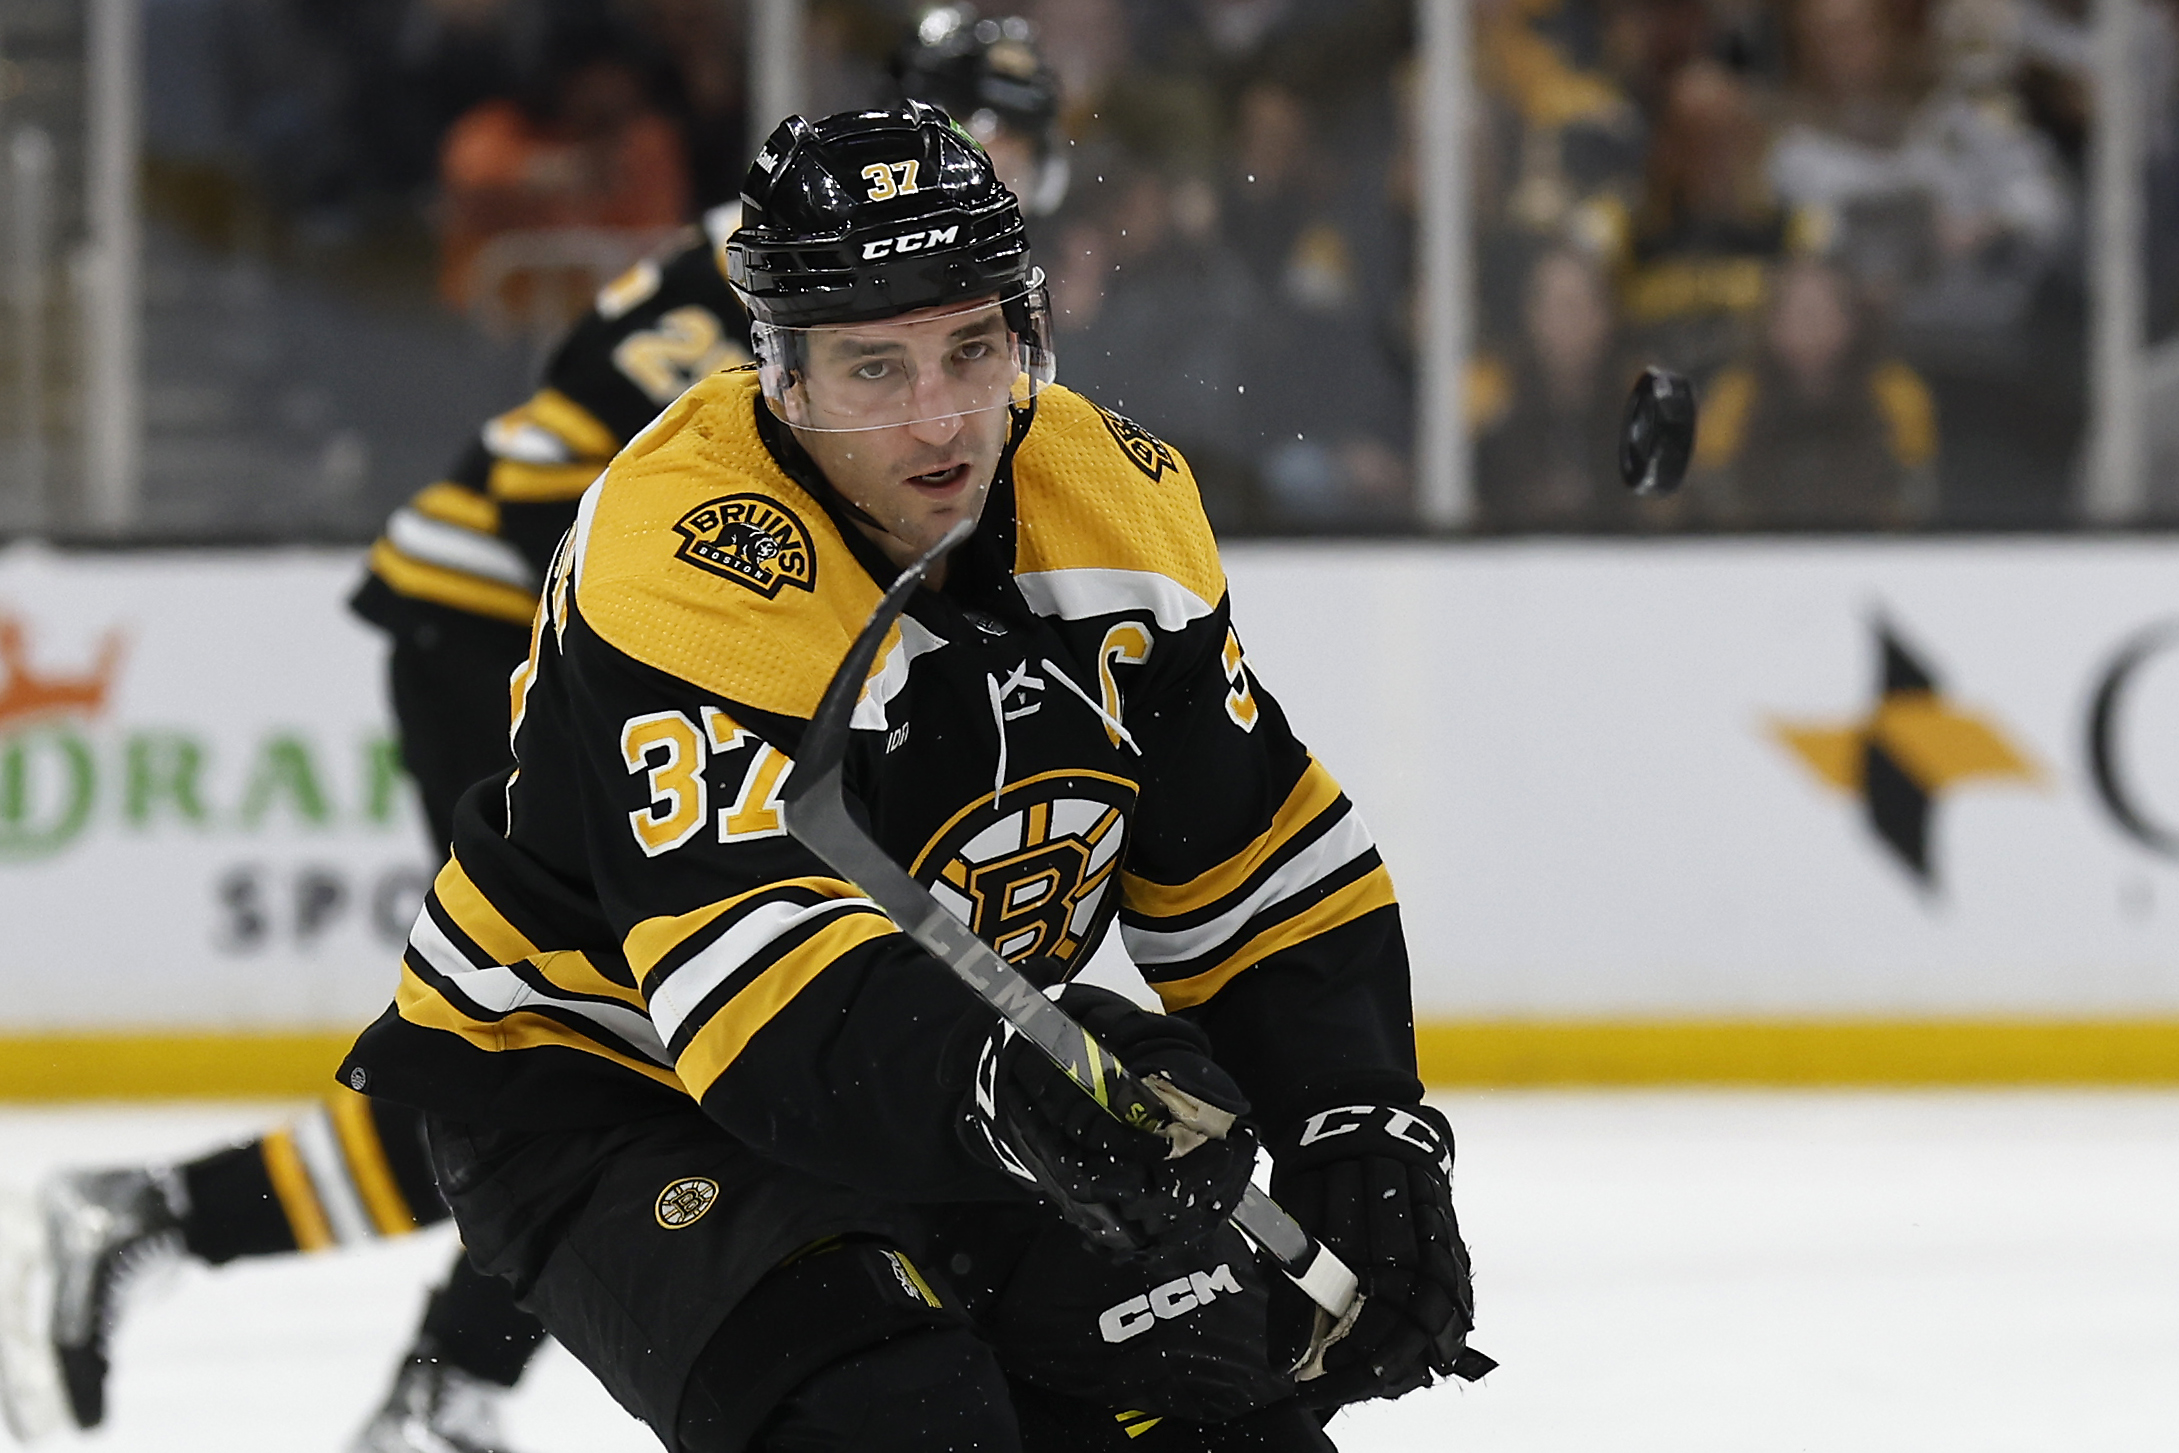 Boston Bruins' Stanley Cup championship proves the best team can win